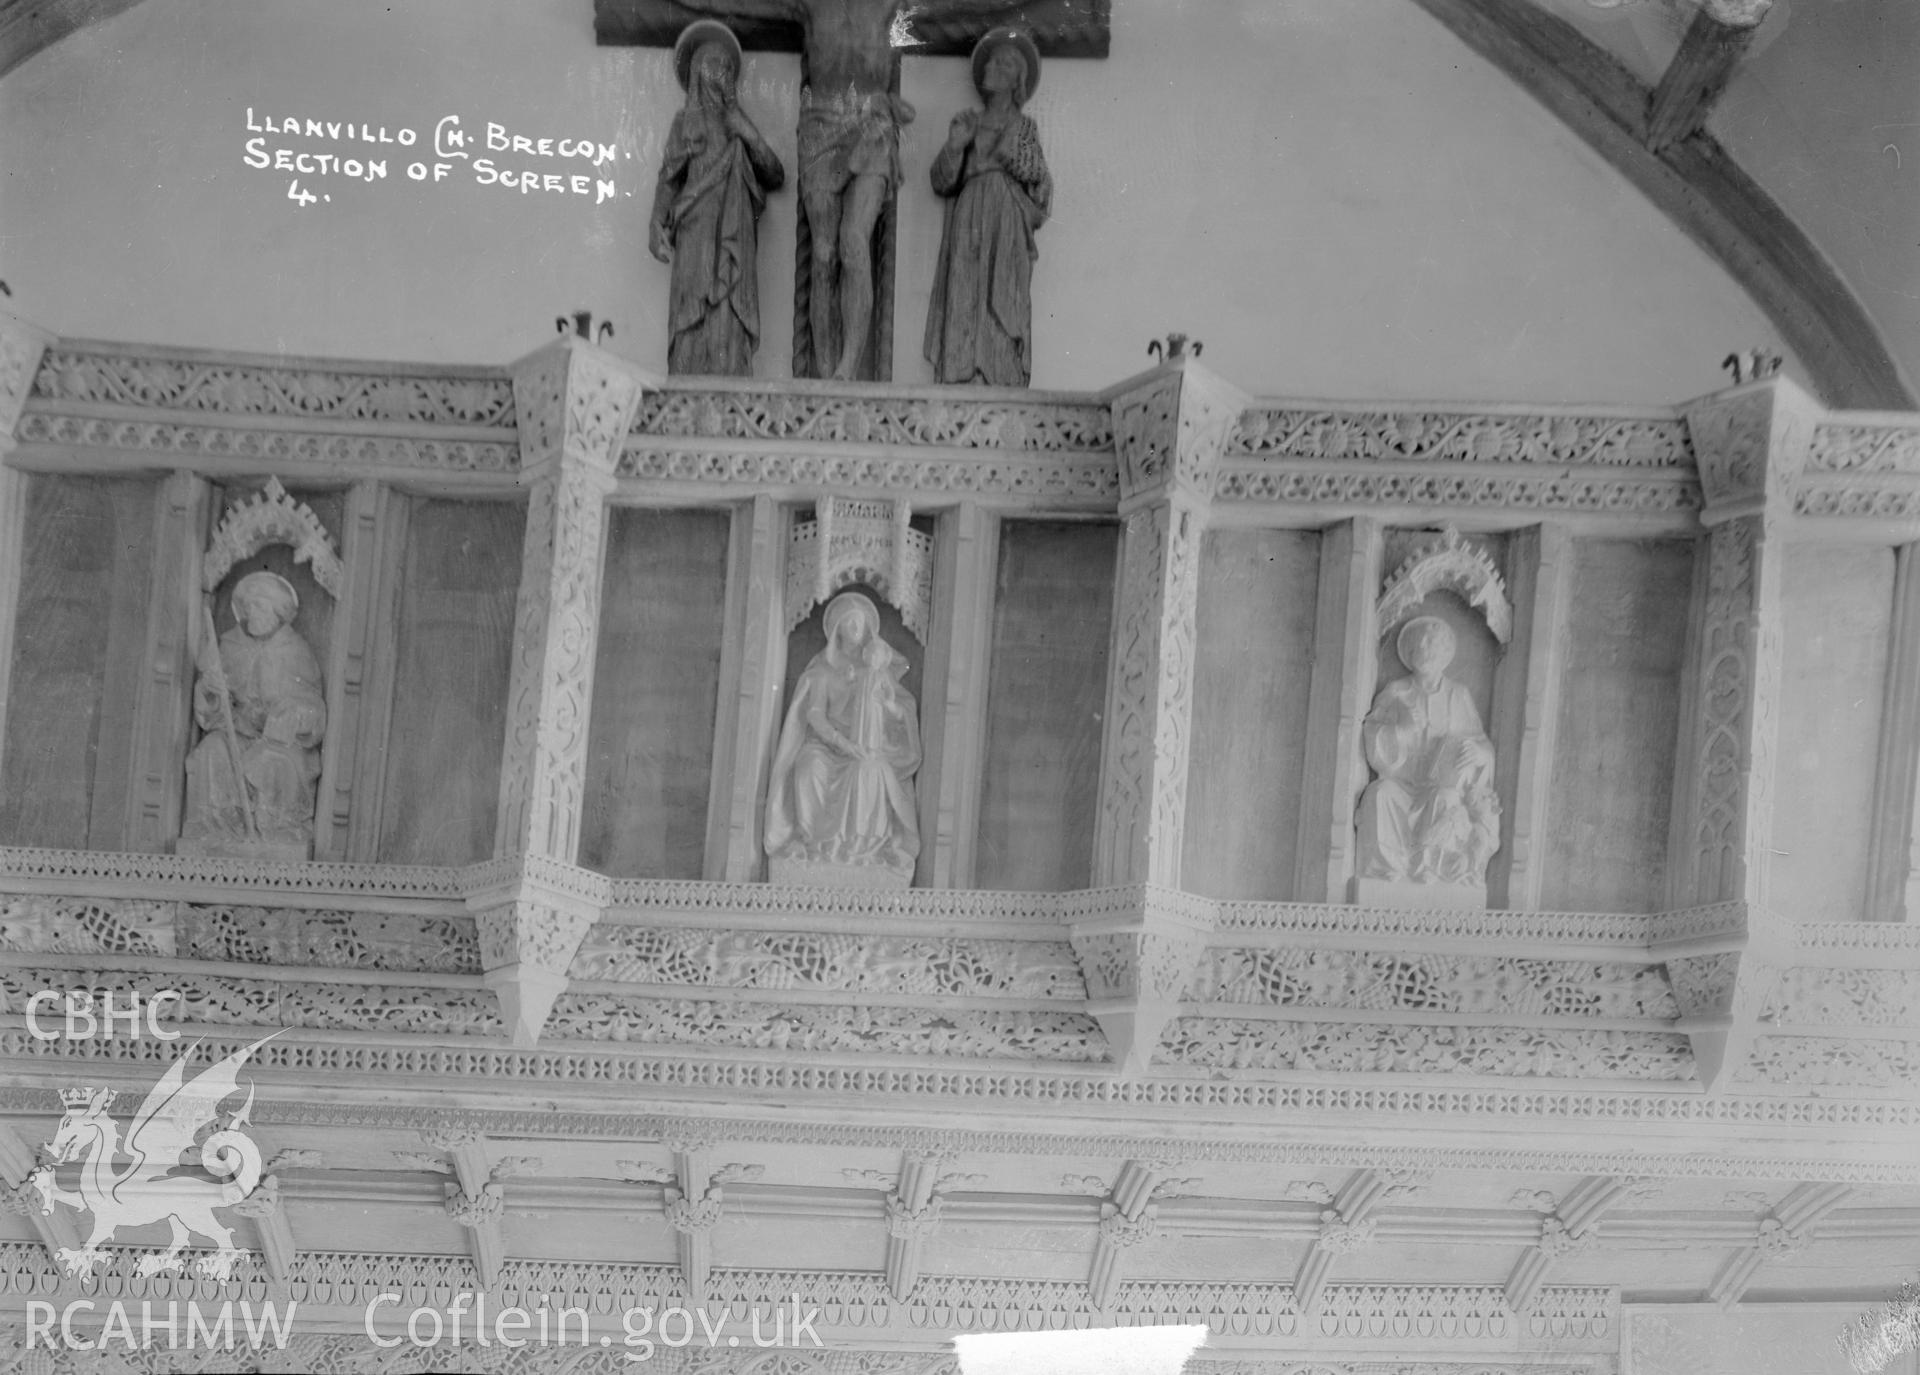 View of screen section in Llanfilo Church, Brecon. taken by W A Call circa 1920.